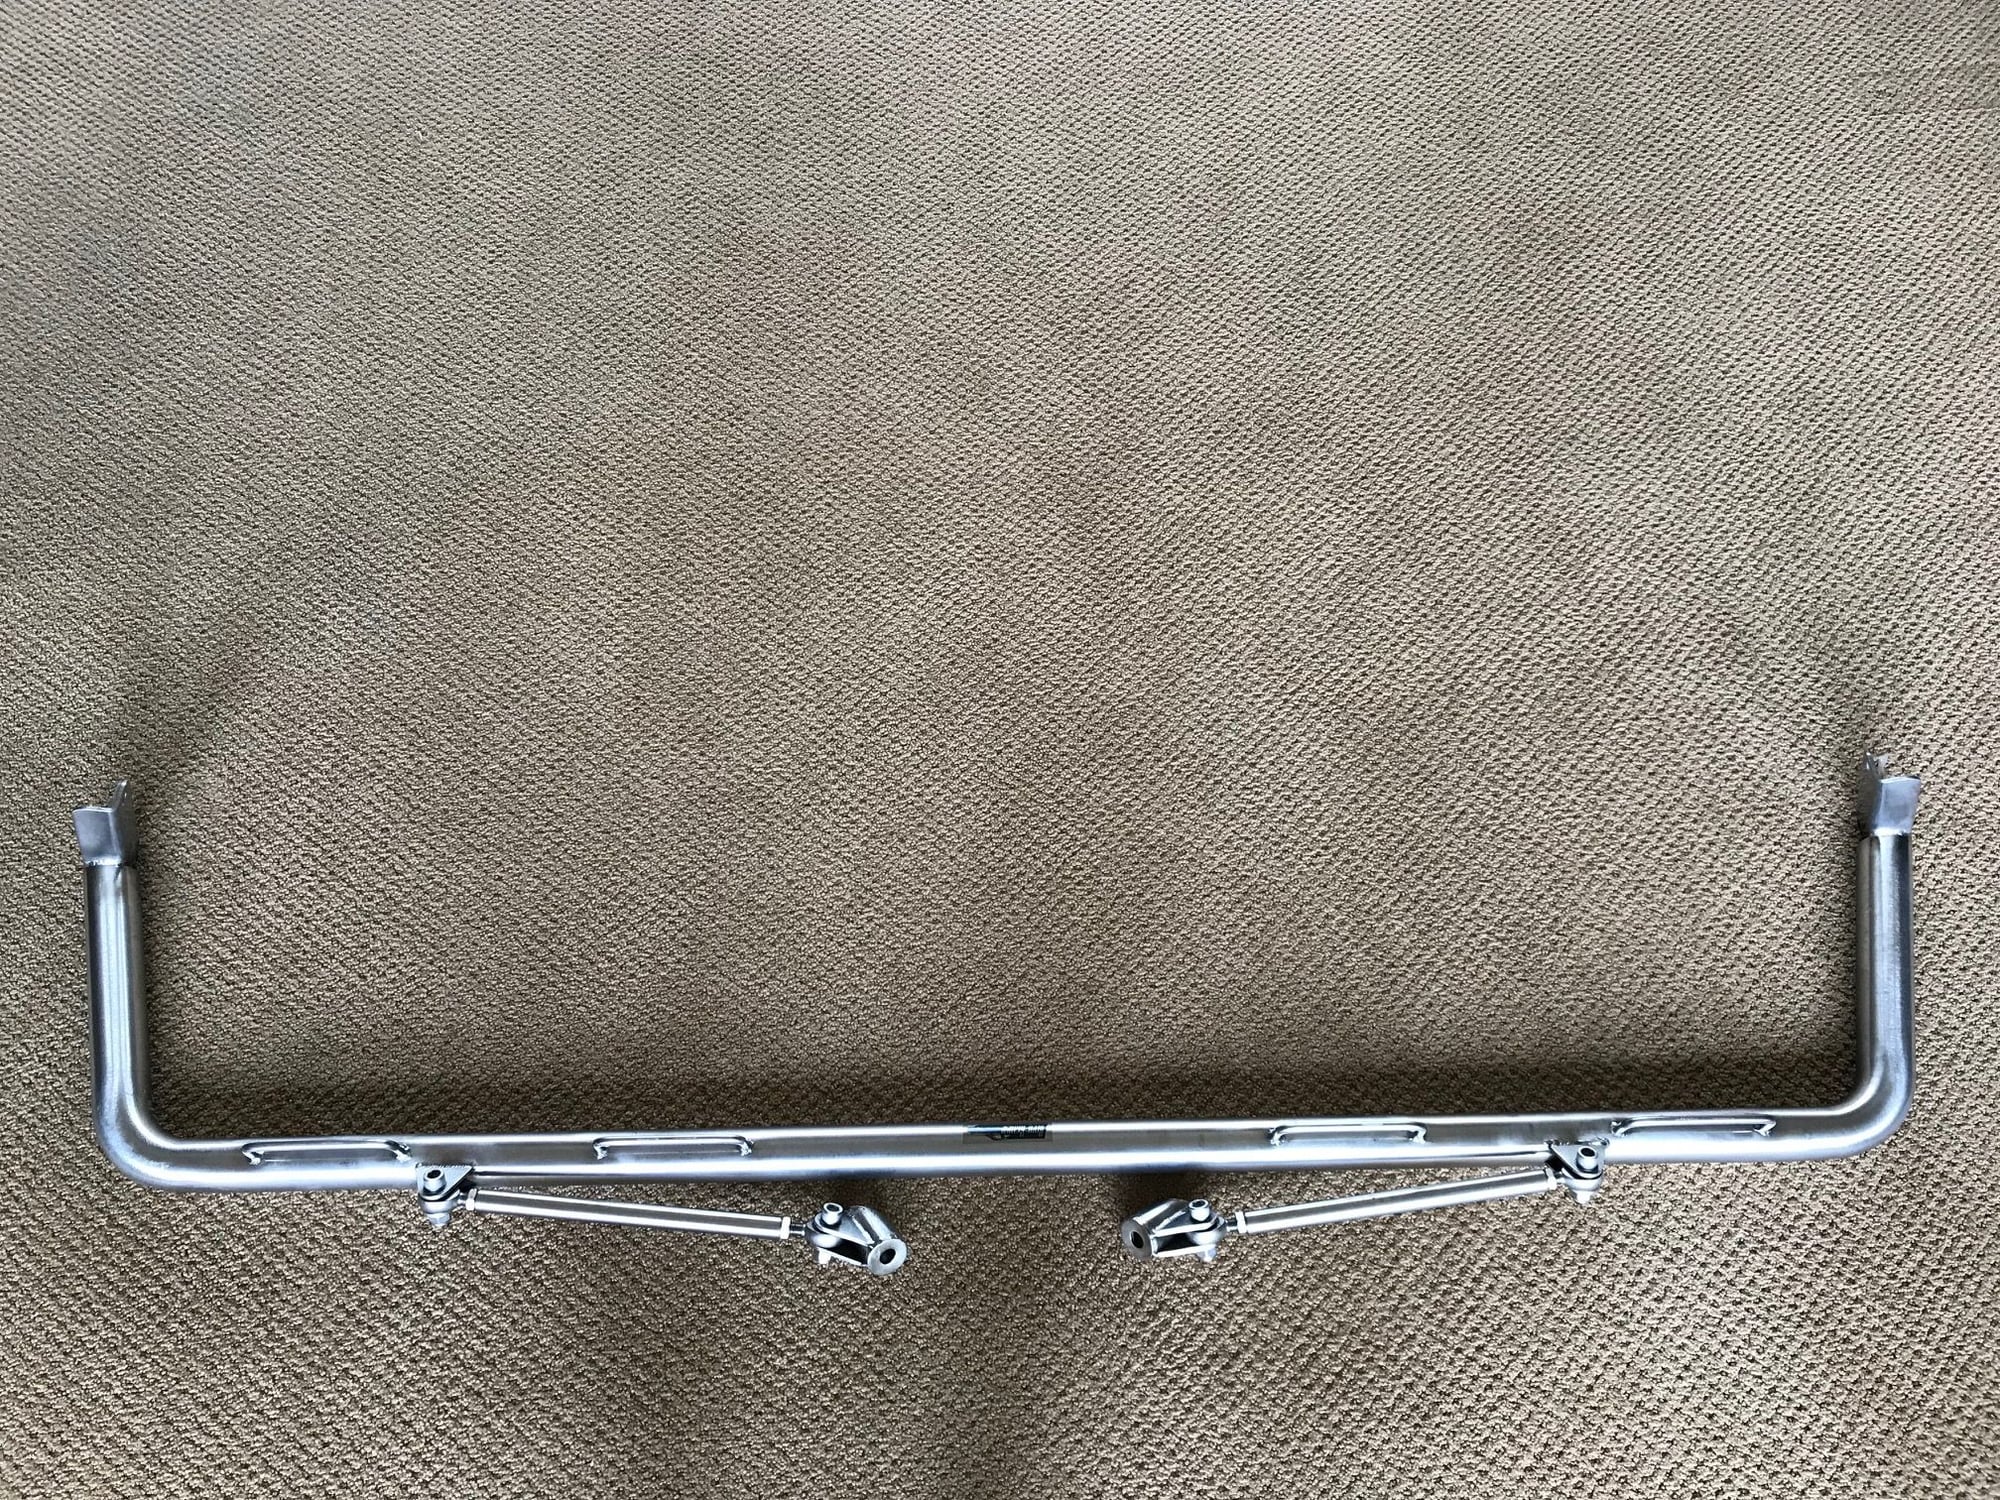 Interior/Upholstery - Brey Krause Harness Guide Bar - 924 944 968 - Used - 1983 to 1995 Porsche 944 - Minnetonka, MN 55345, United States